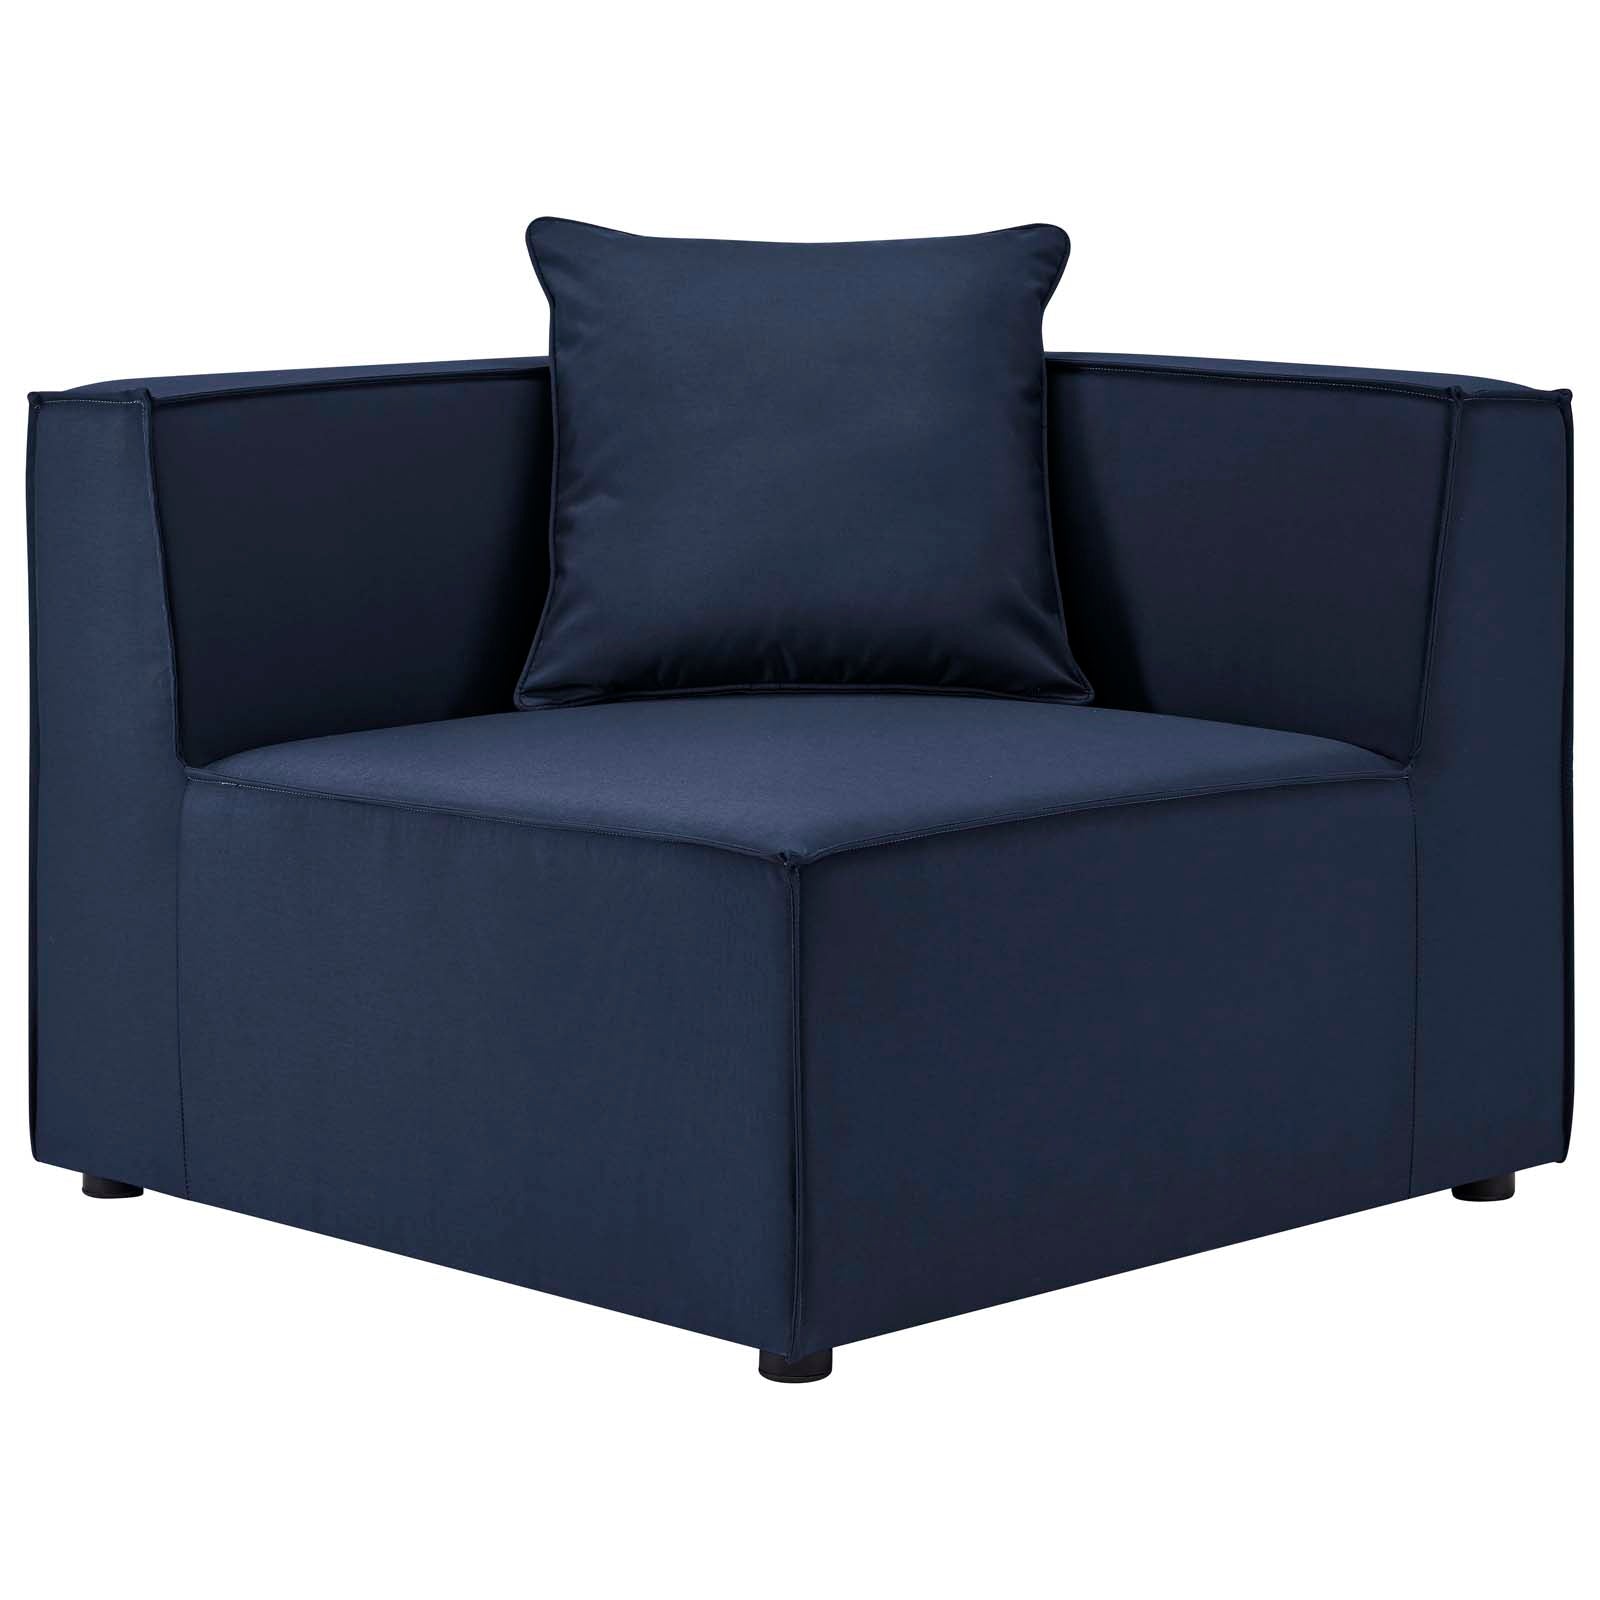 Modway Outdoor Conversation Sets - Saybrook Outdoor Patio Upholstered Loveseat and Ottoman Set Navy